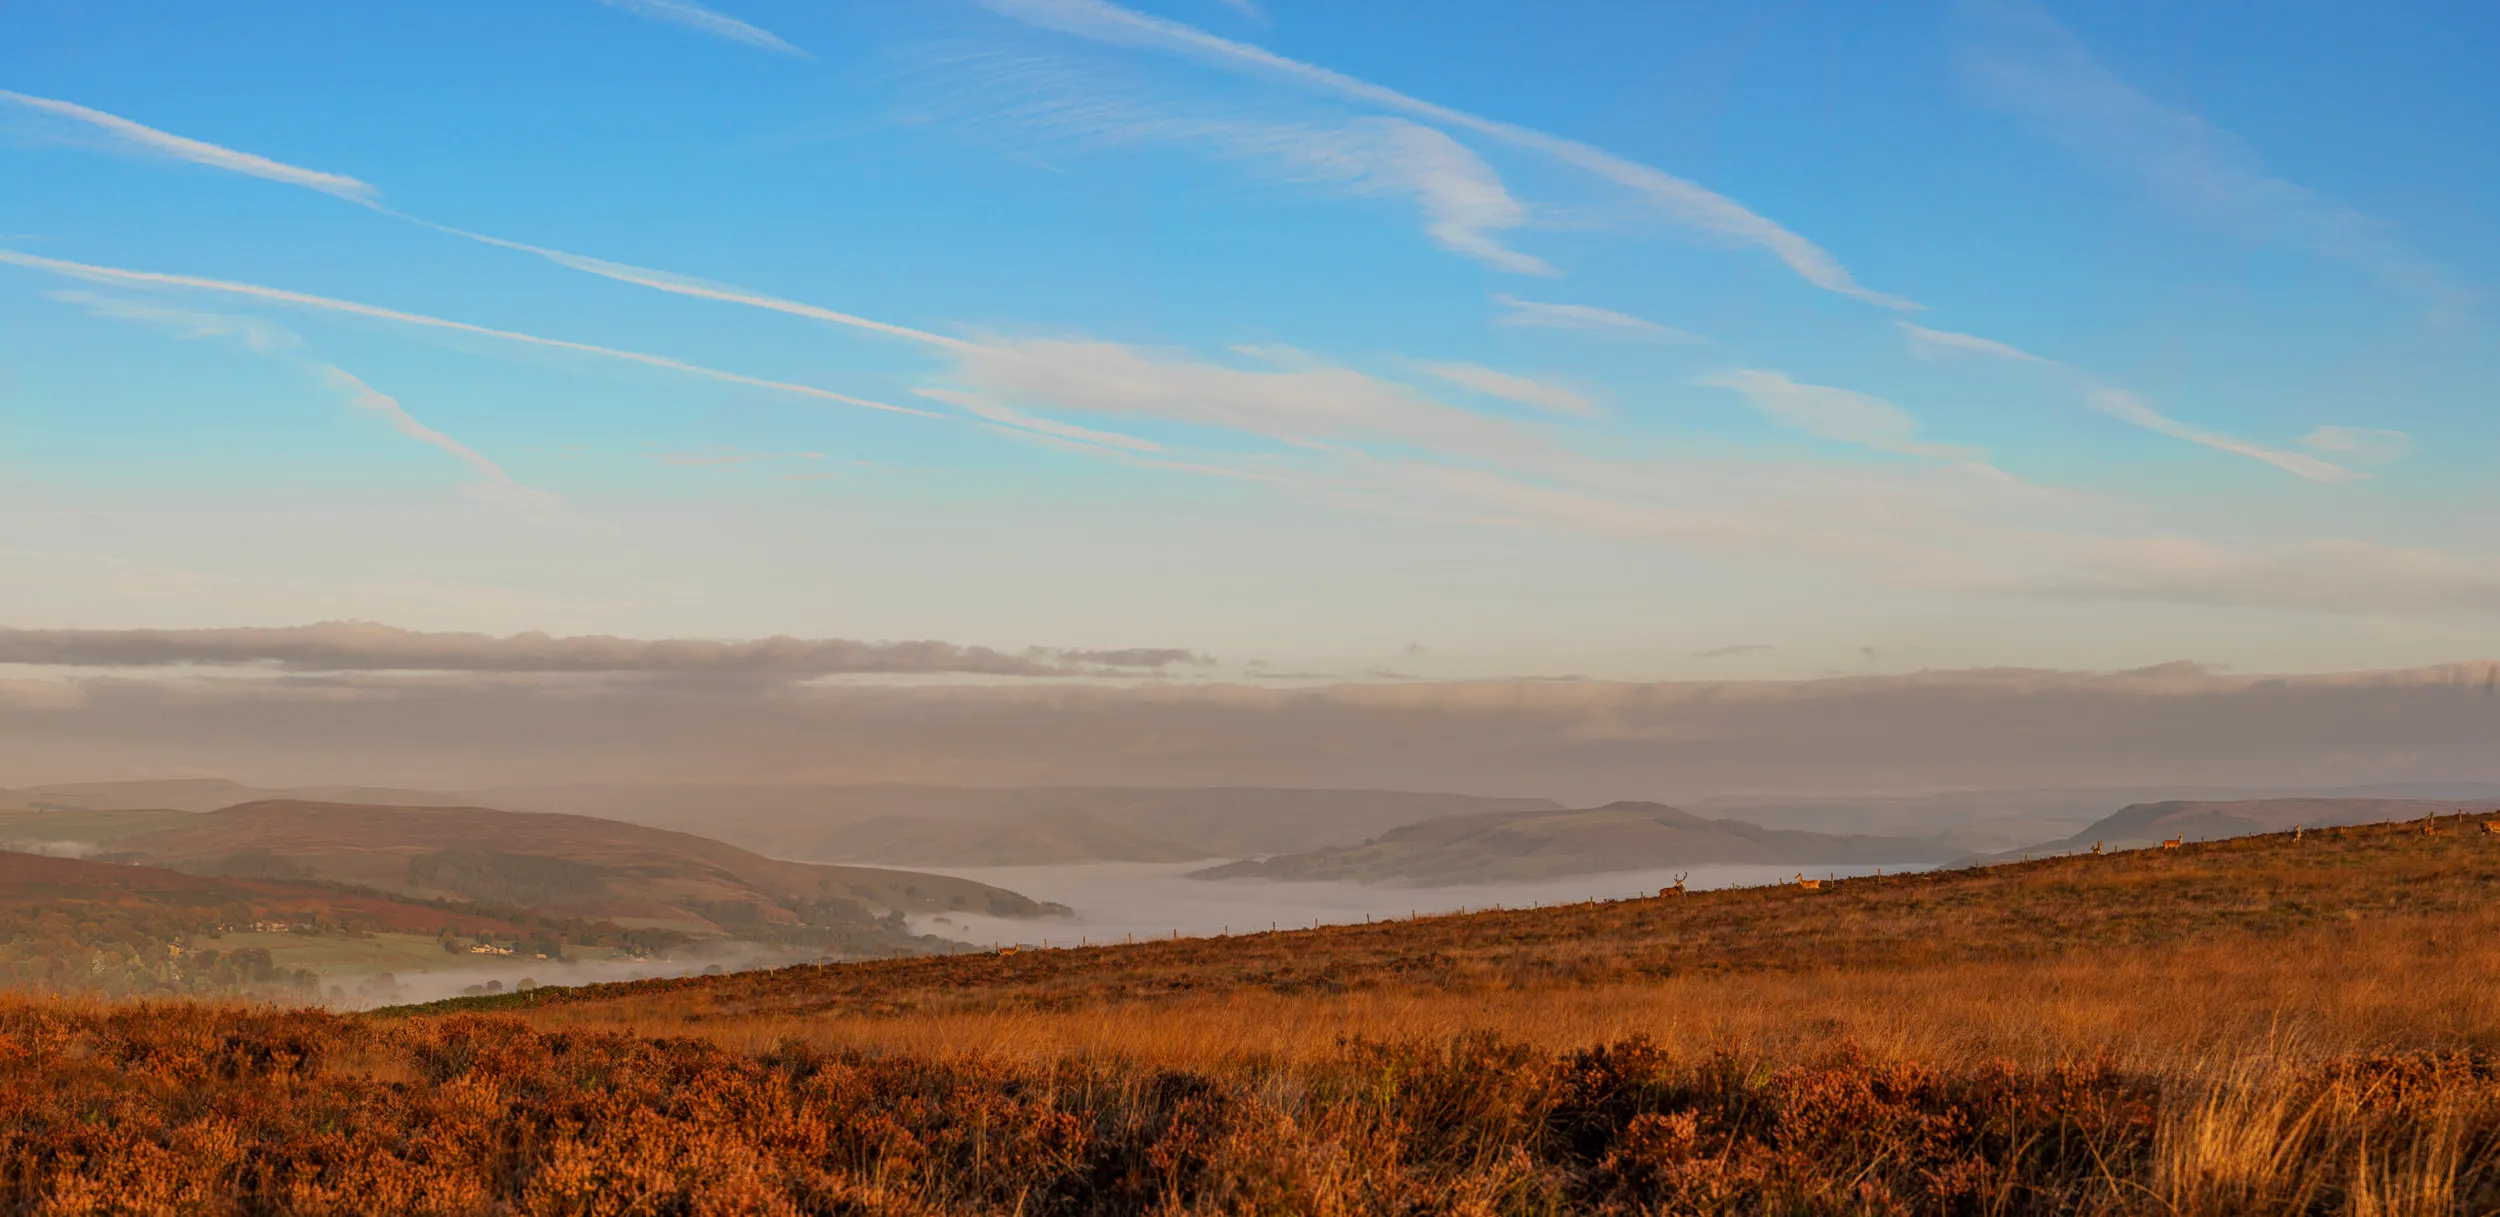 A view across vast, undulating moorland, with a bank of fog resting in the valleys.